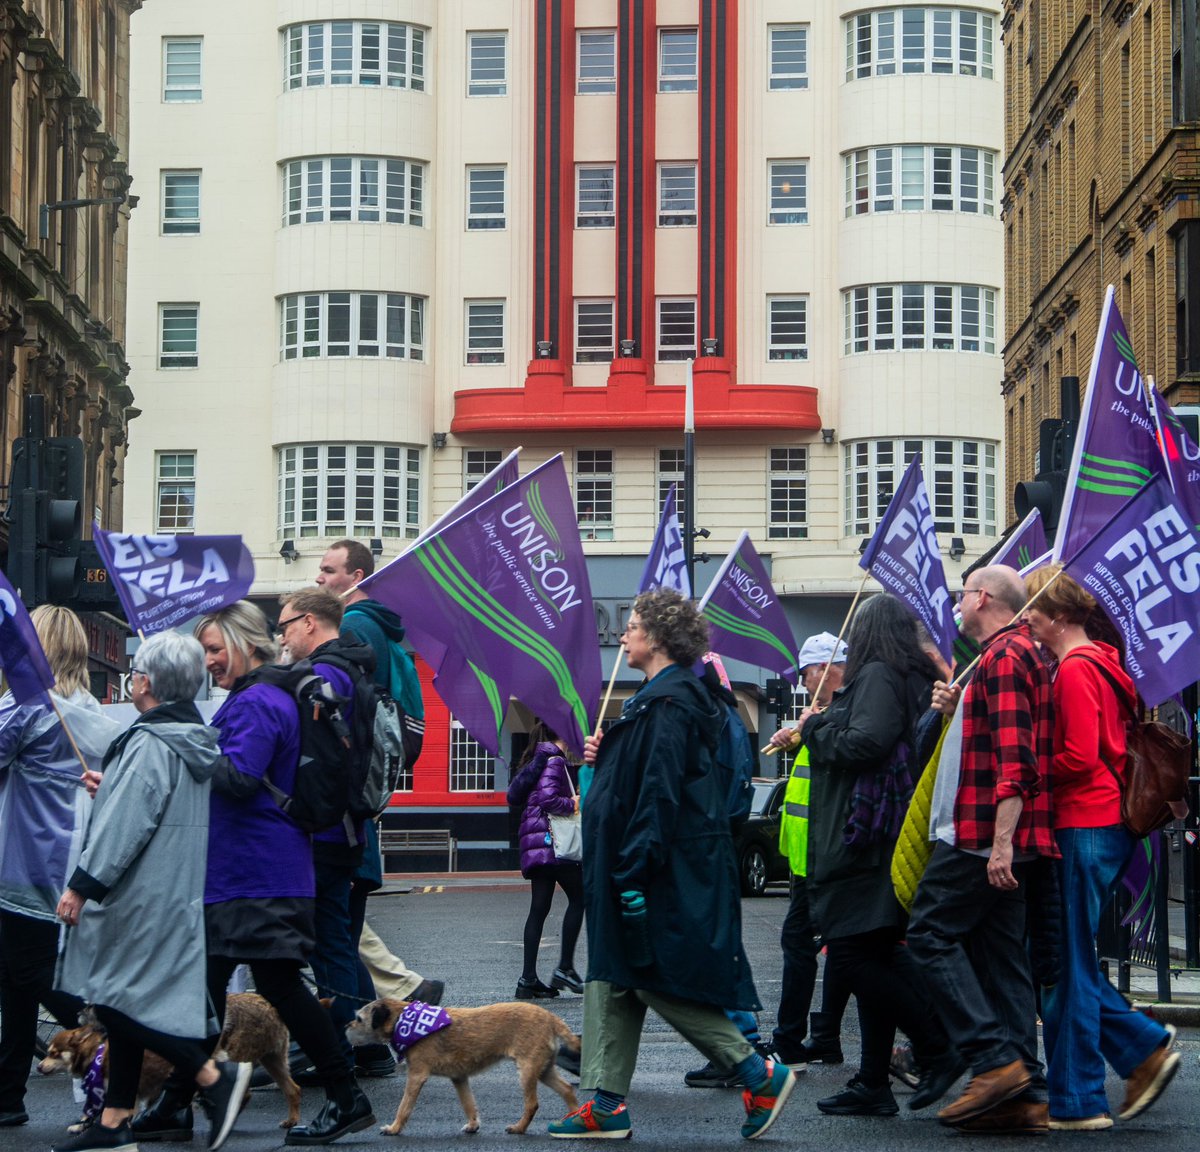 A few photos from yesterday’s May Day Worker’s March from George Square to the Glasgow University Union ✊🏻🧵